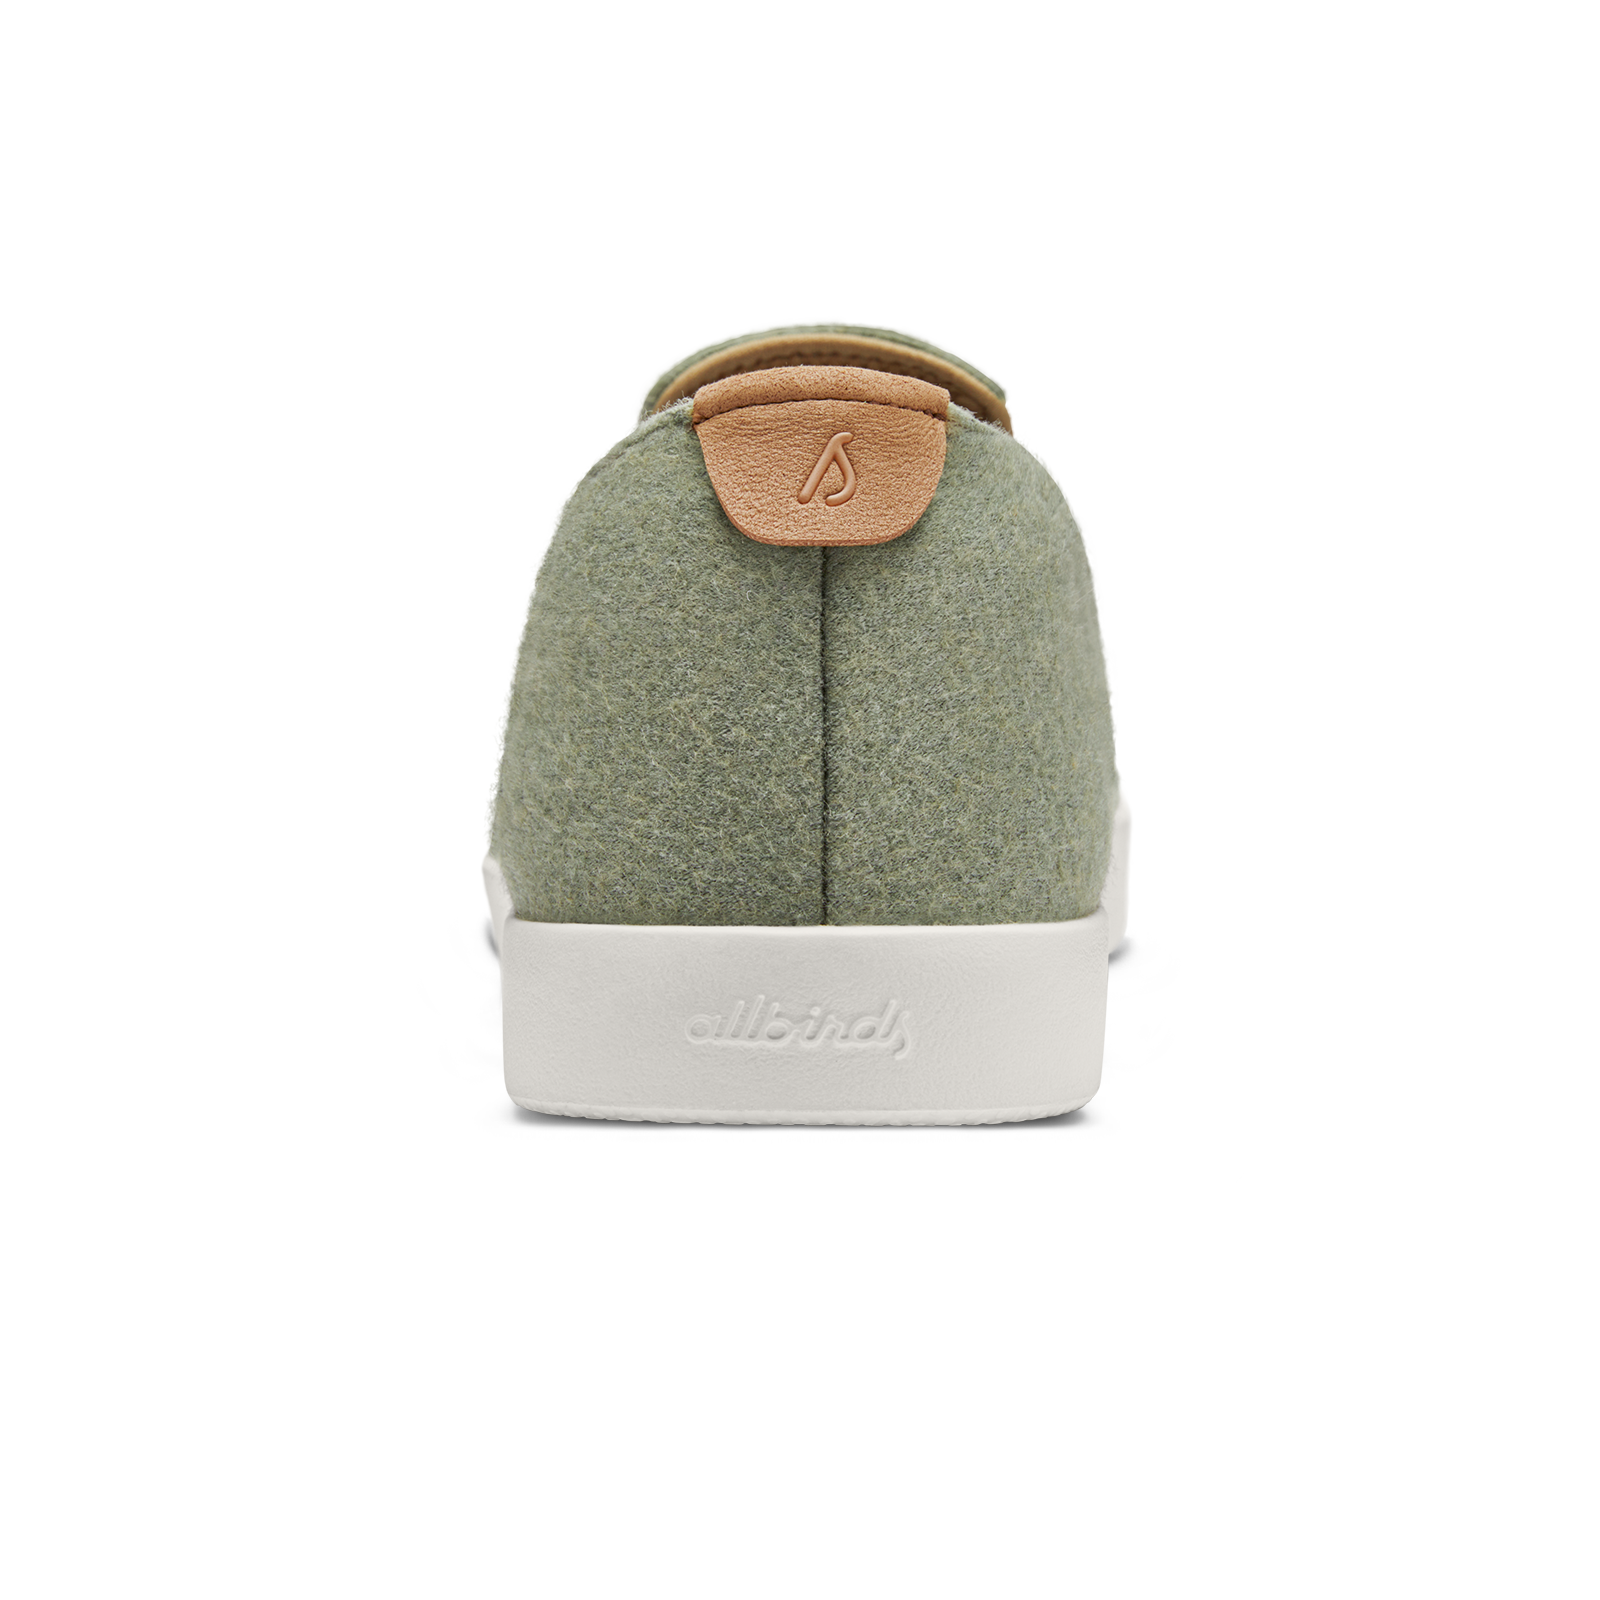 Women's Wool Loungers - Hazy Pine (Natural White Sole)